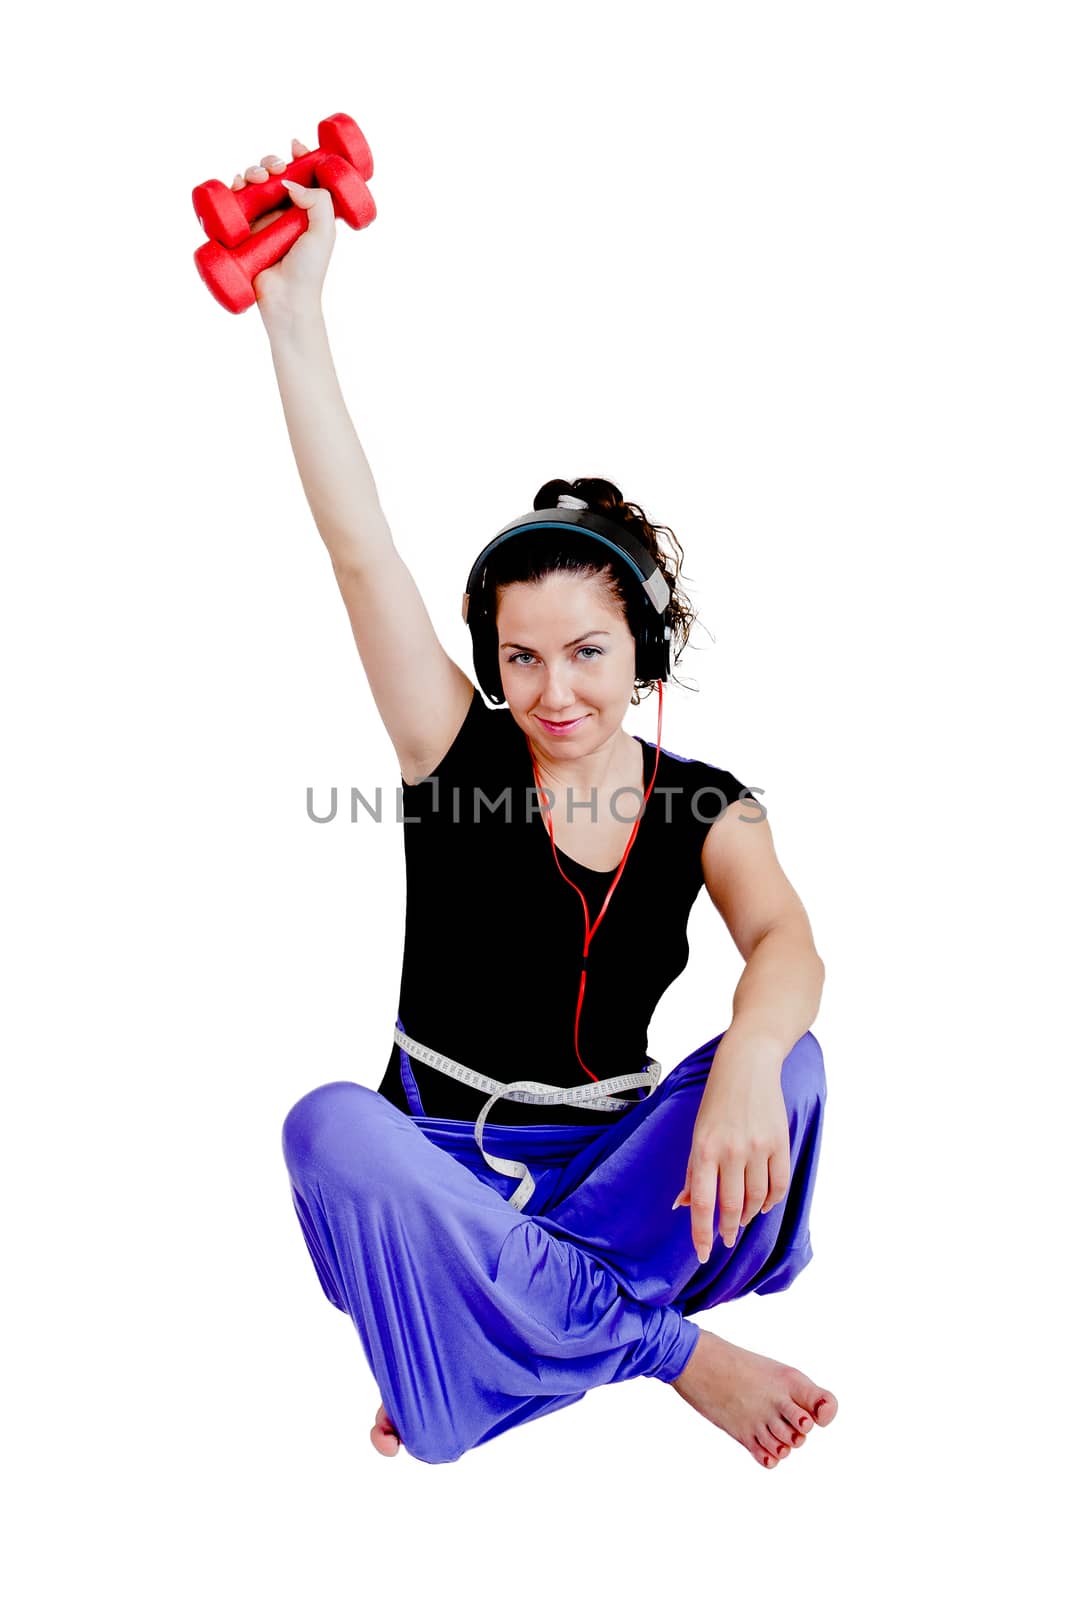 Isolate against white background. Girl shows how she plays sports with dumbbells and it helps her life; in good shape. 